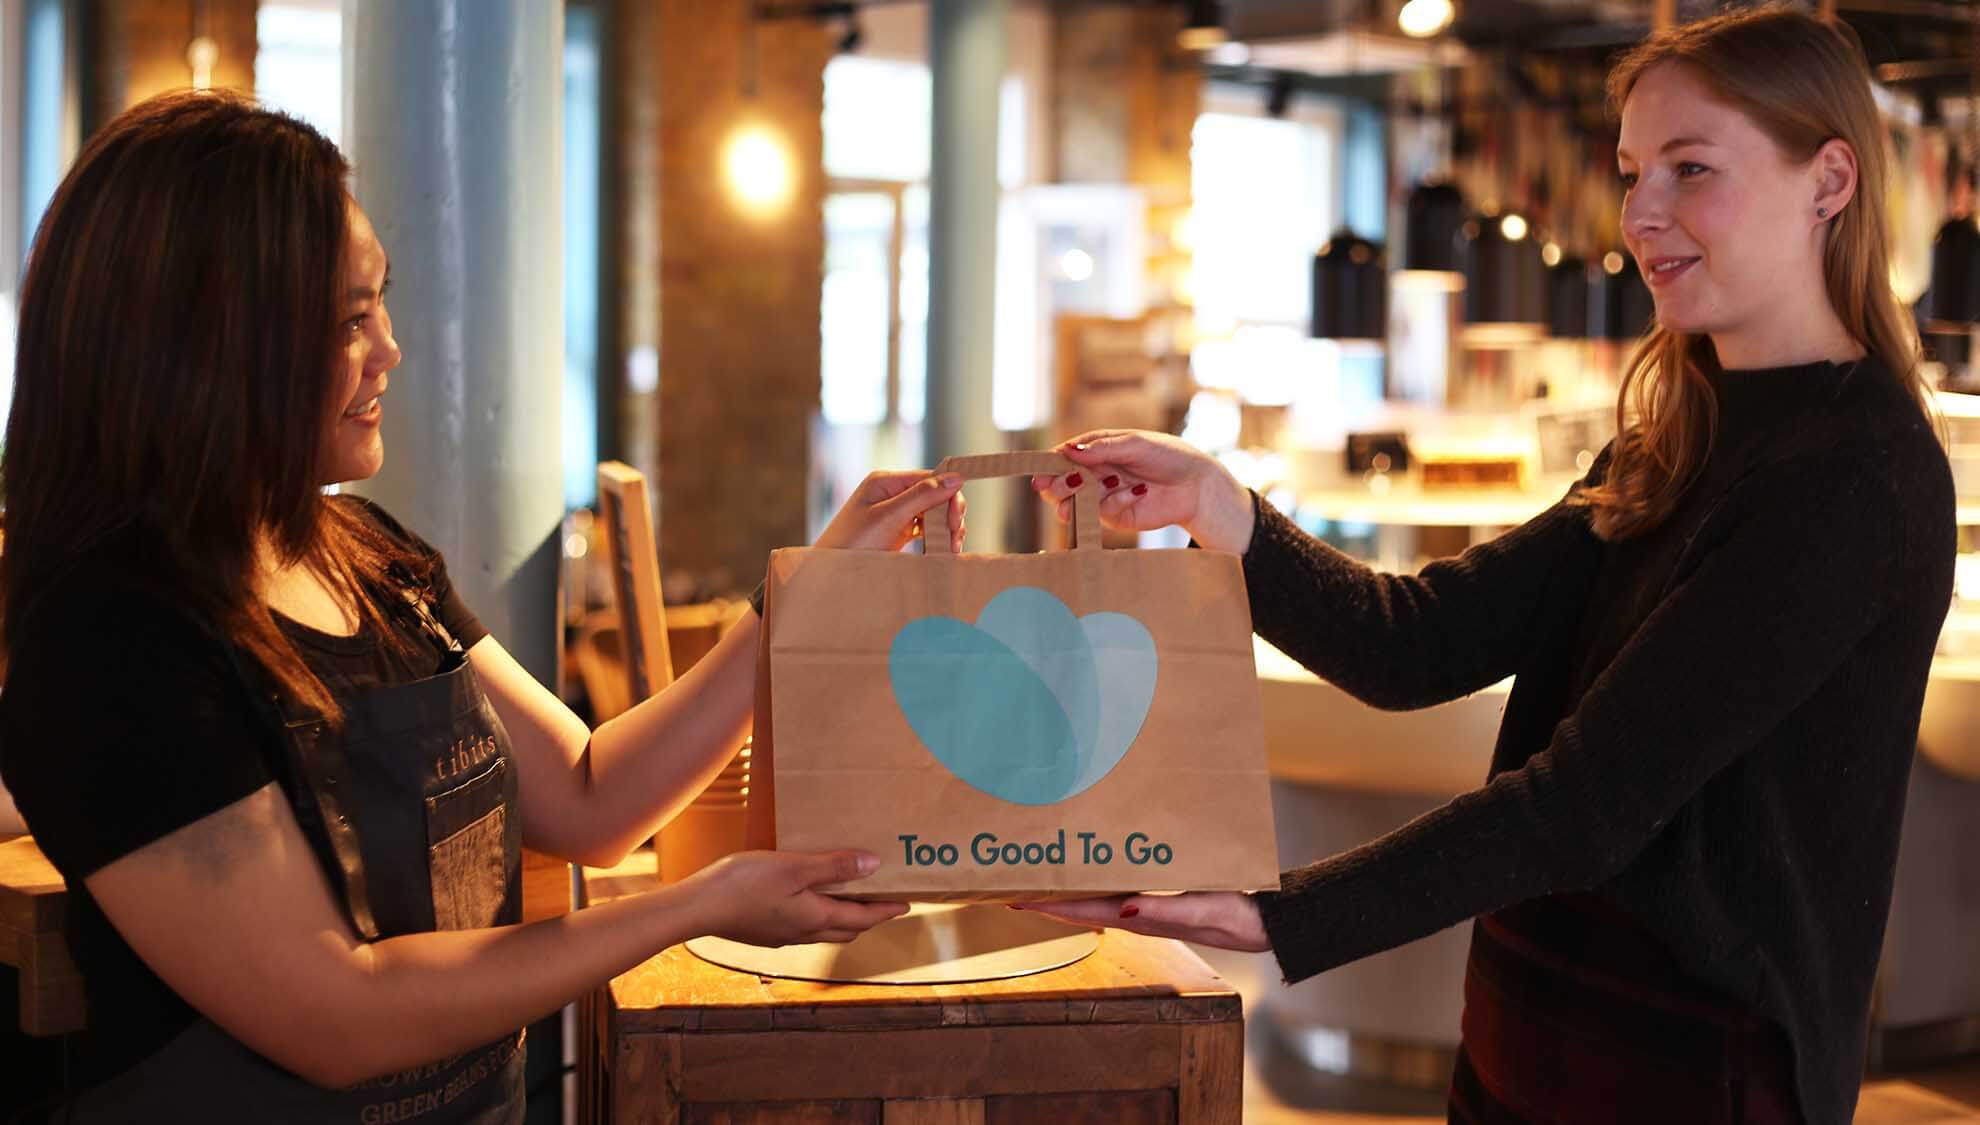 Woman collecting a Too Good To Go bag from a cafe